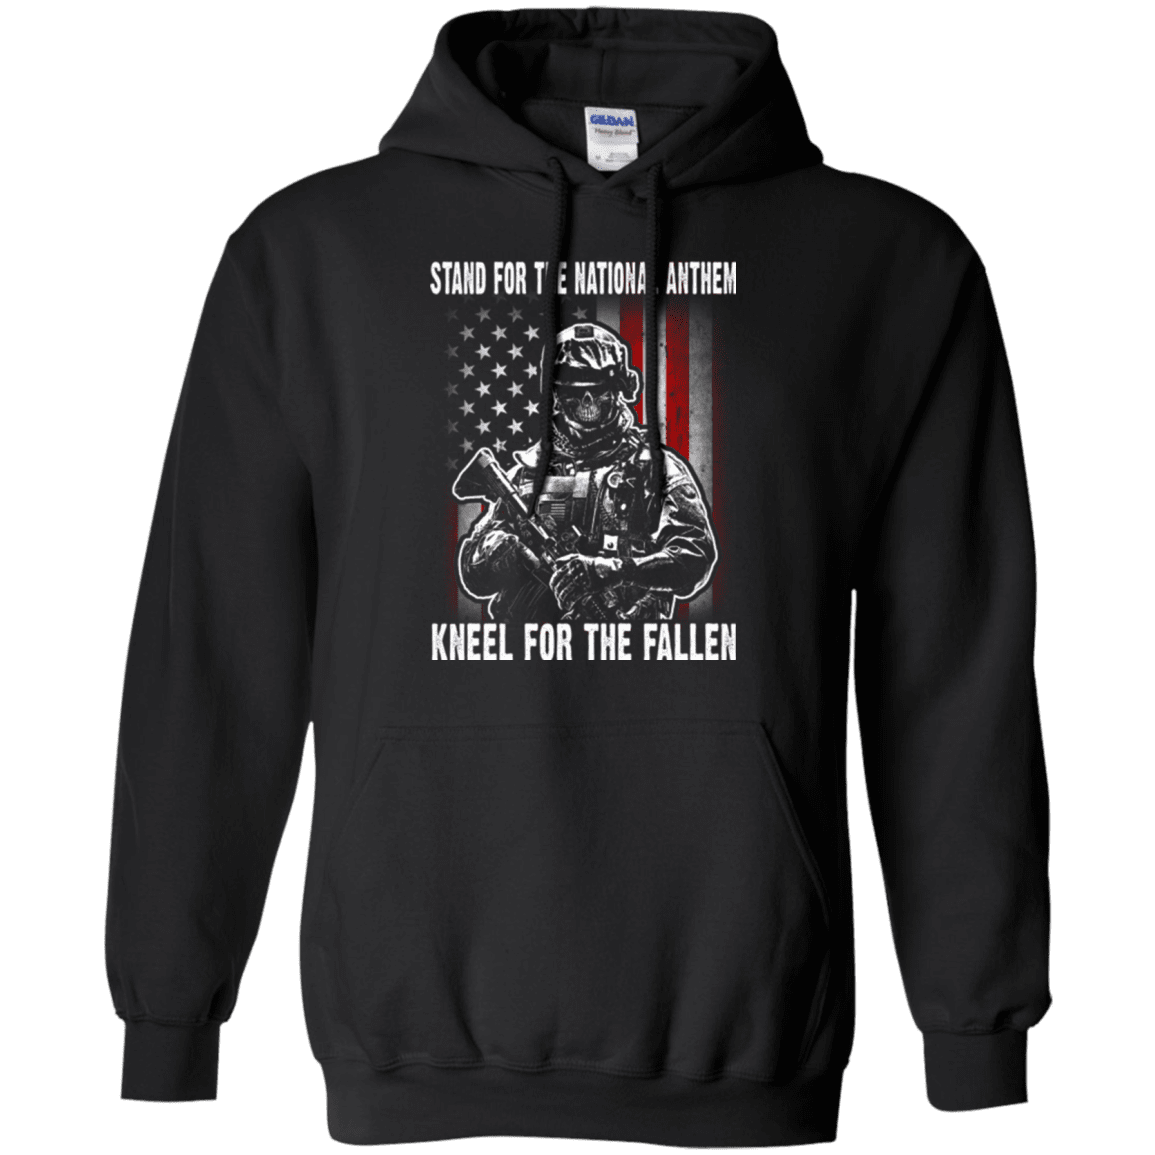 Military T-Shirt "Stand For The National Anthem Kneel For The Fallen"-TShirt-General-Veterans Nation